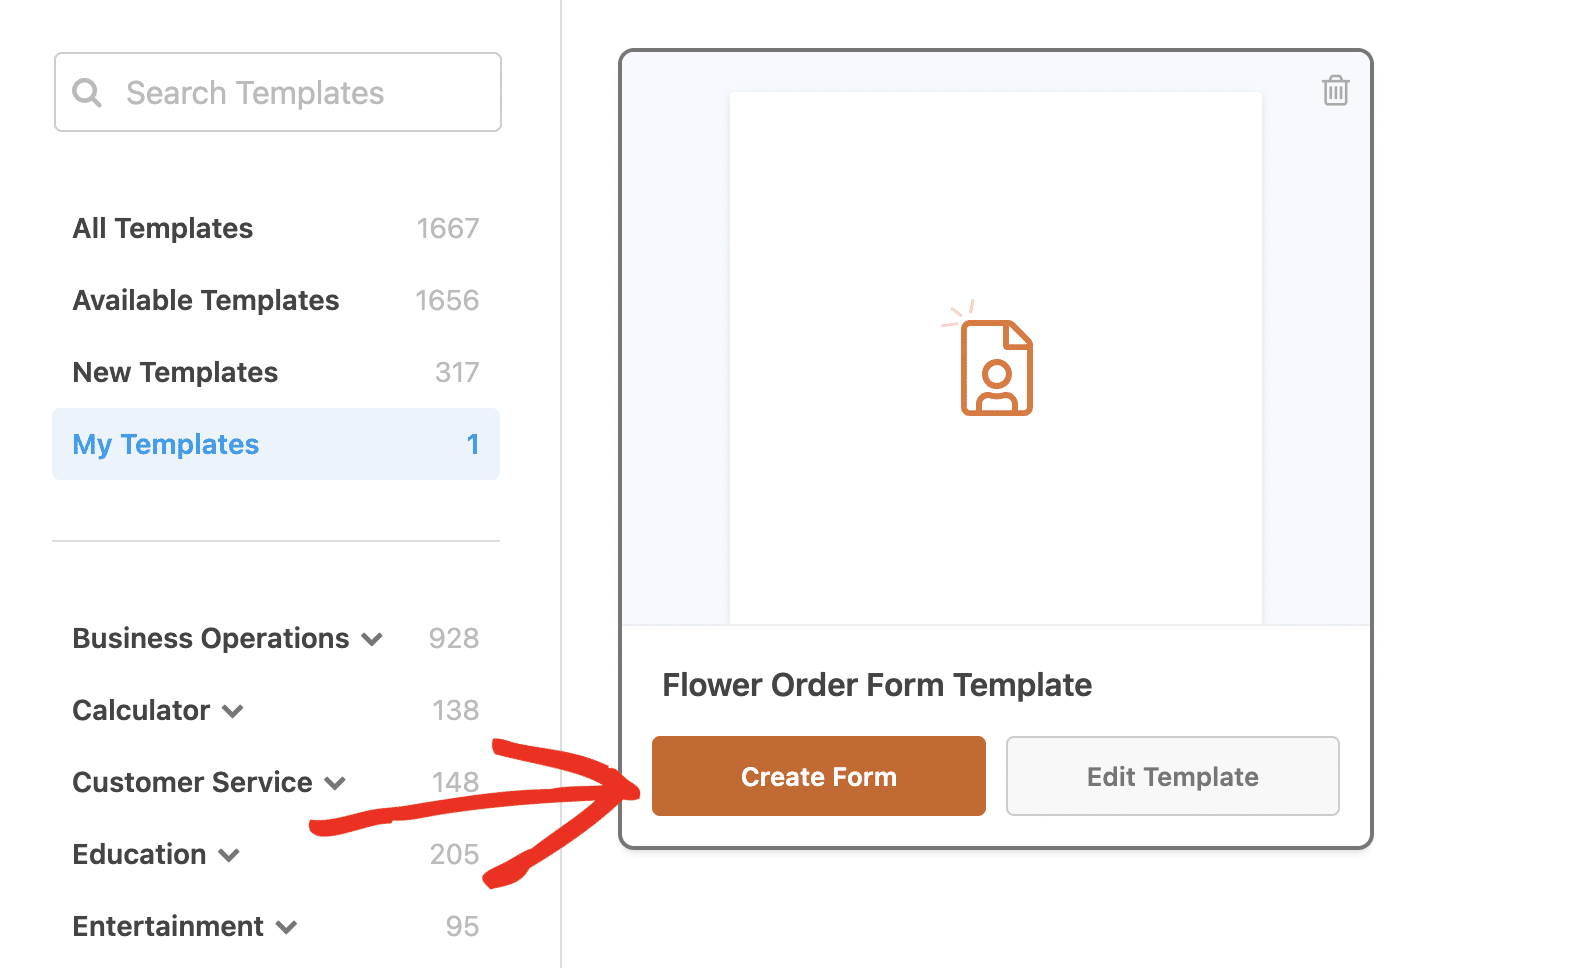 Creating a form from a custom template